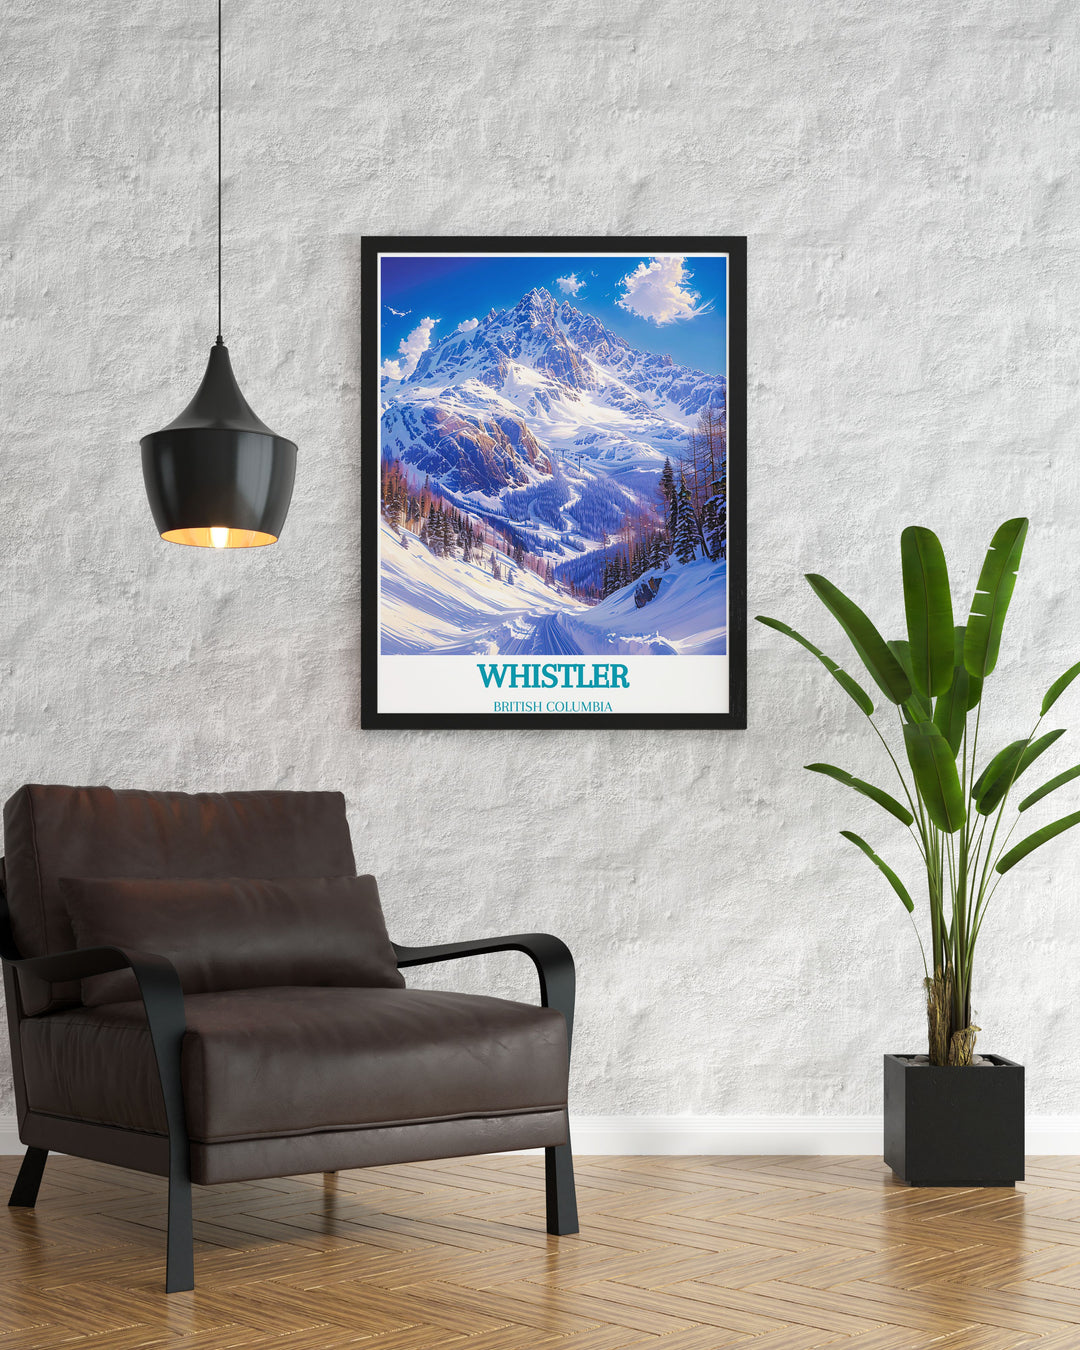 Timeless framed art depicting the serene beauty of Whistler Blackcomb, British Columbia. The vibrant colors and detailed illustrations highlight the resorts majestic views and dynamic terrain, perfect for any room.